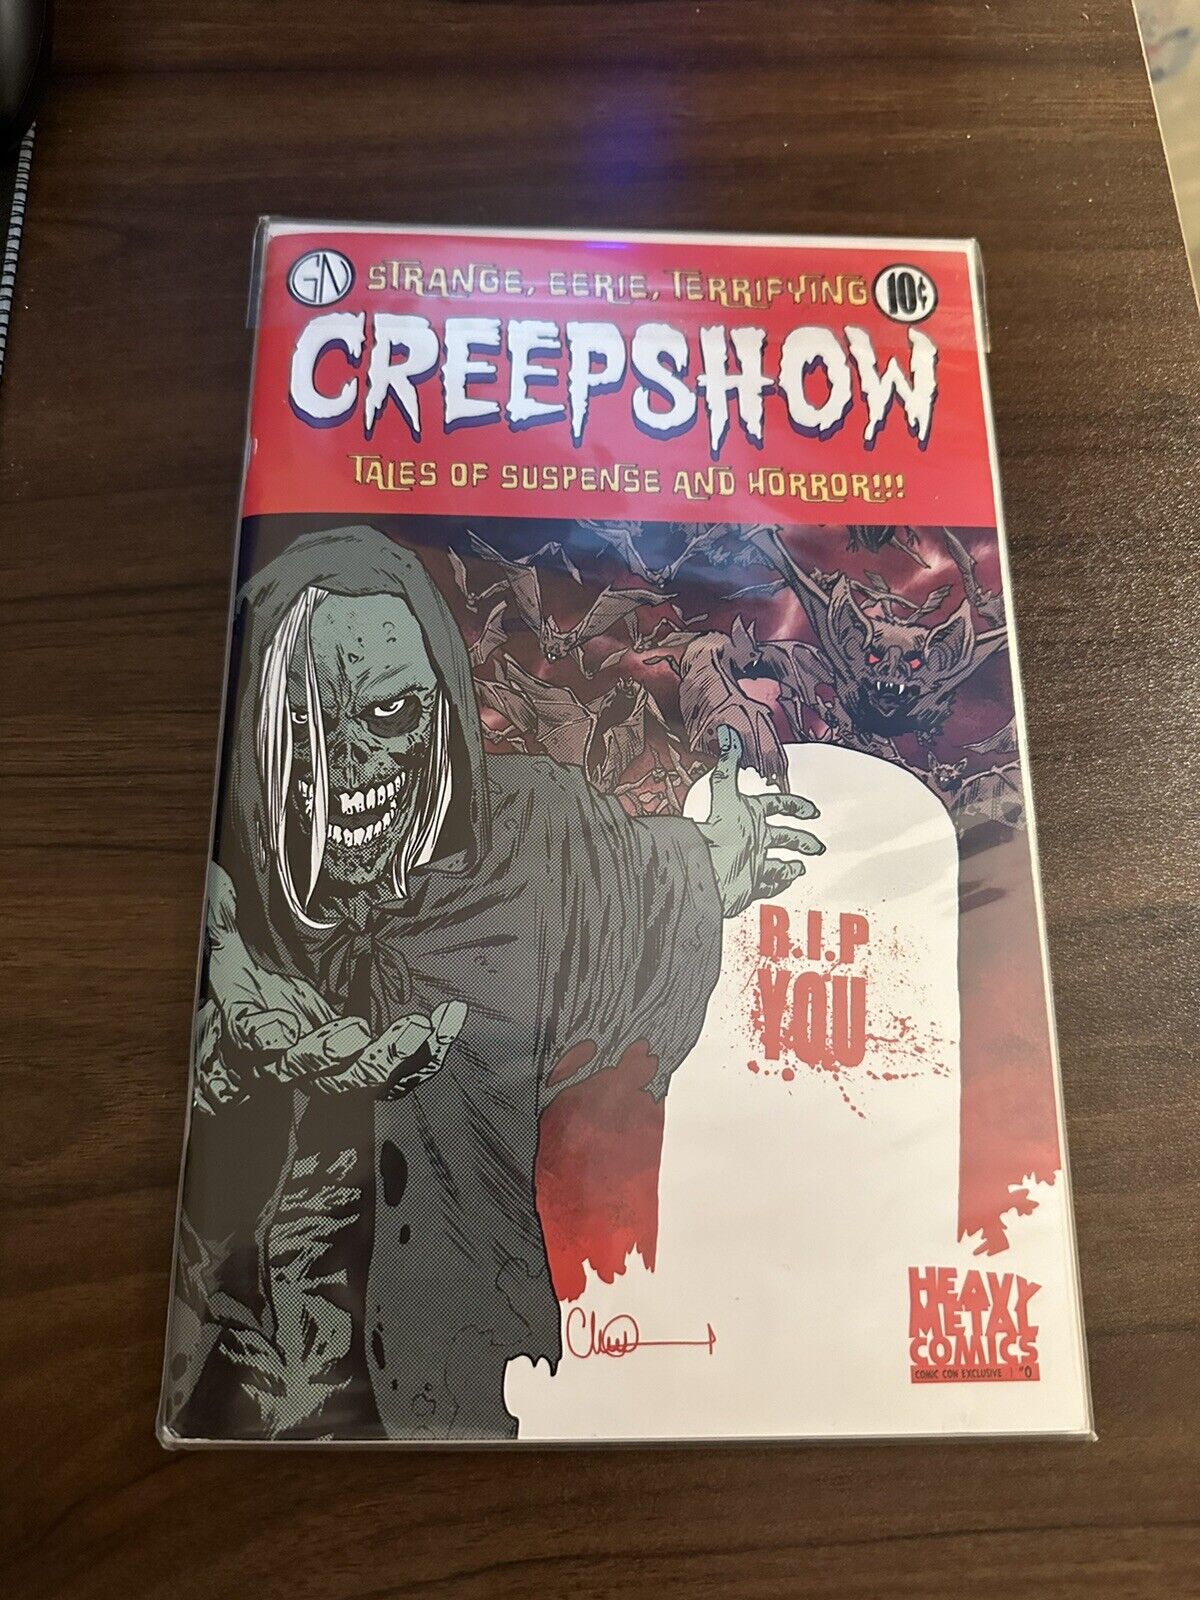 CREEPSHOW #1 SIGNED BY GREG NICOTERO Limited /1000 SOLD OUT Graphic sdcc 